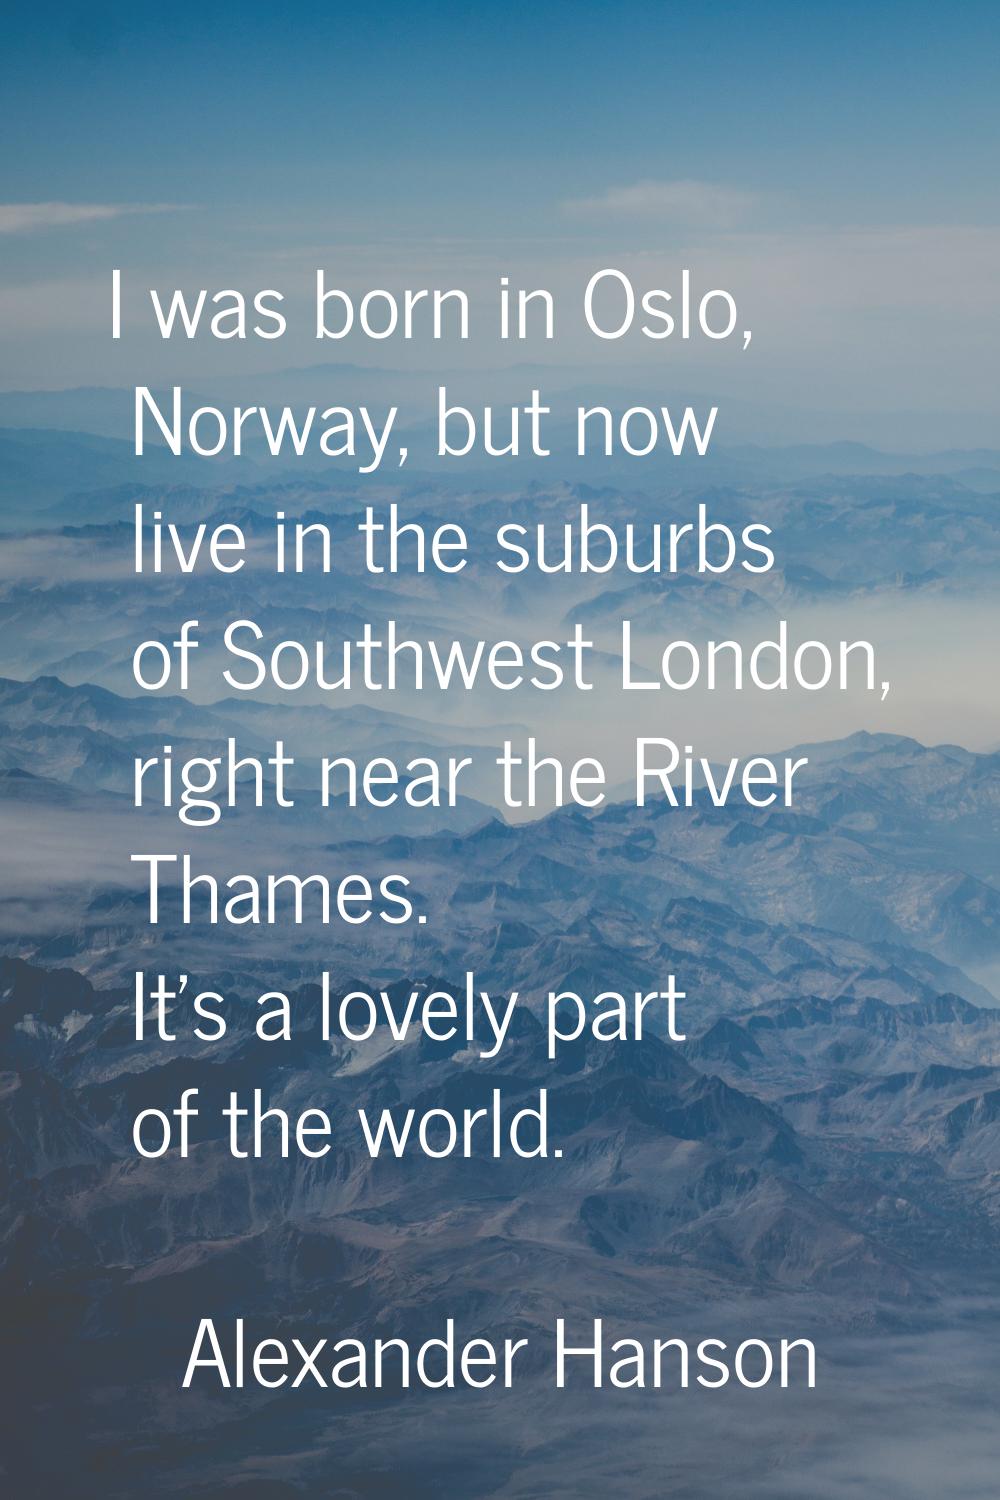 I was born in Oslo, Norway, but now live in the suburbs of Southwest London, right near the River T